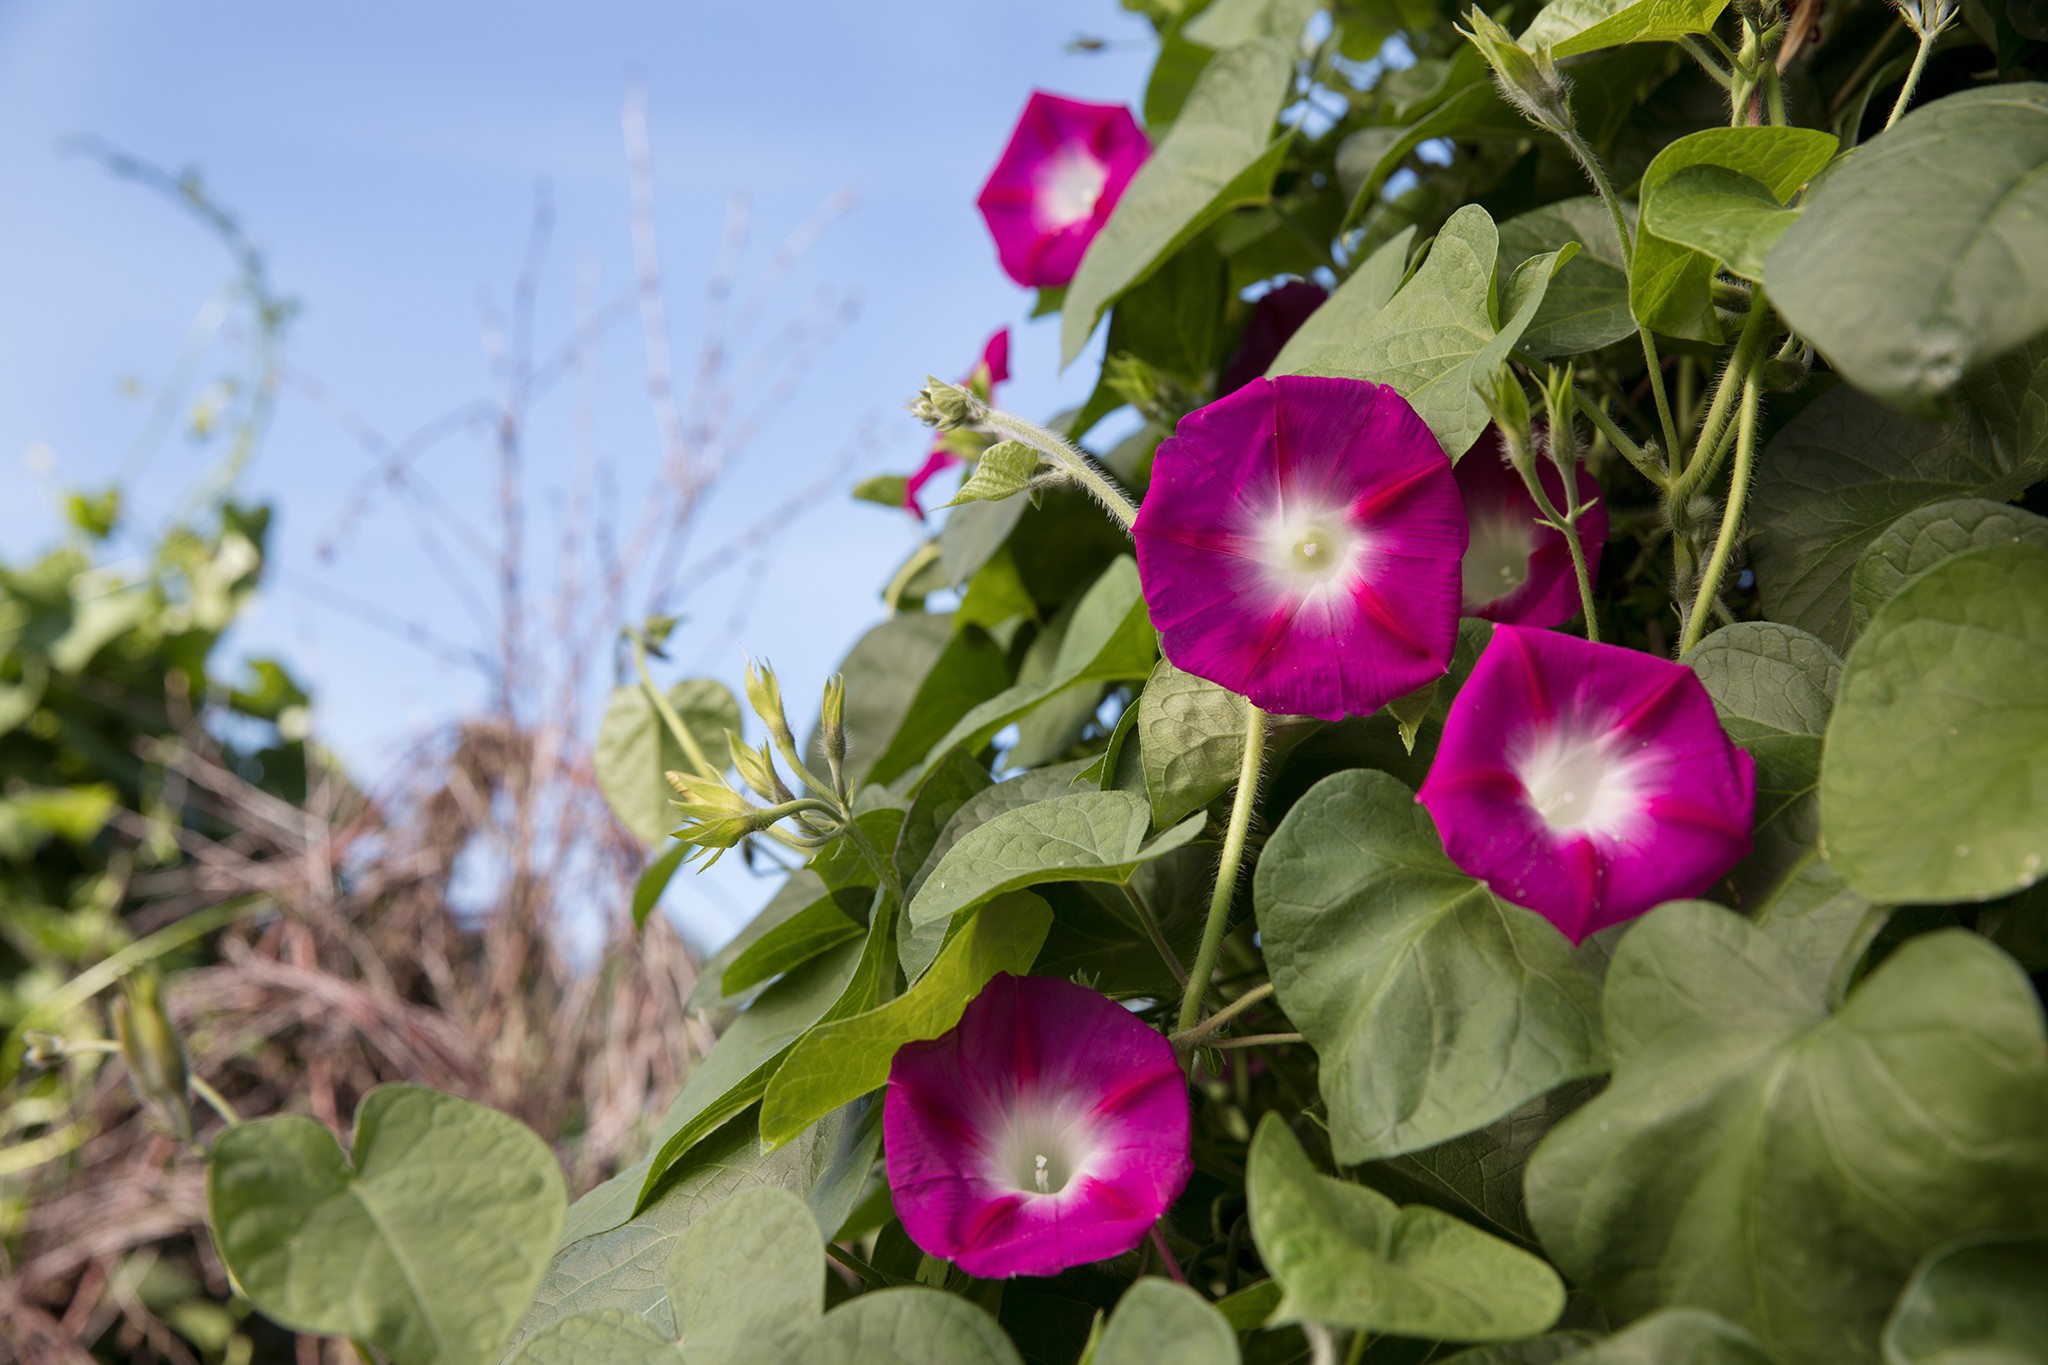 Climbers from seed - Ipomoea 'Party Dress'